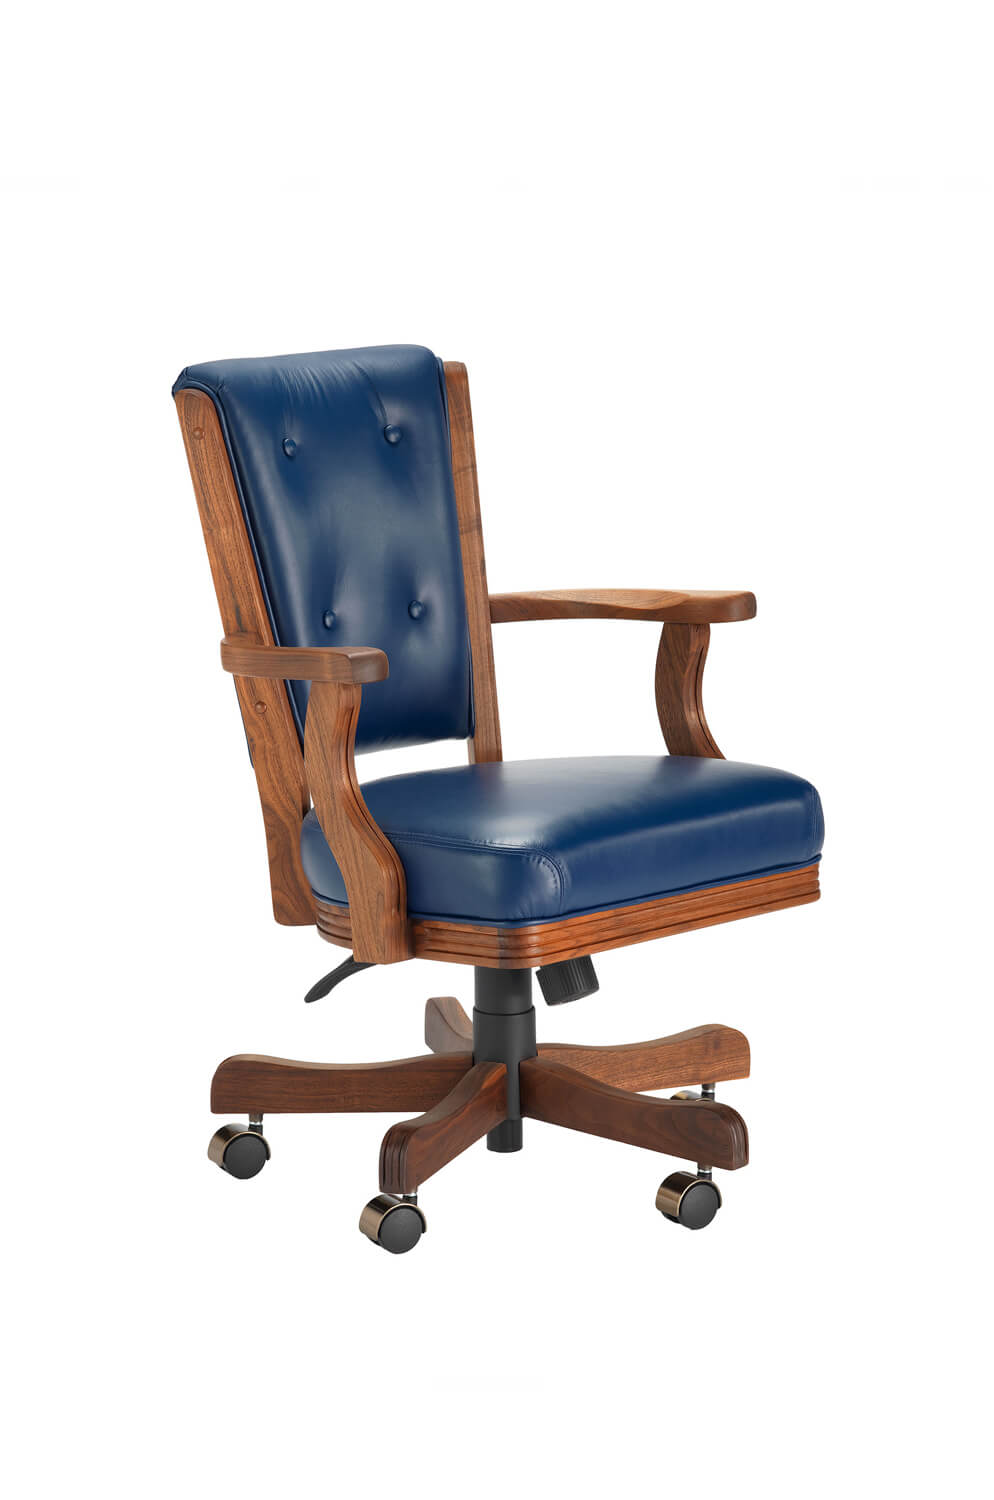 Electric treatment chair - PFL01 - Mis Medical - 3-section / on casters / height-adjustable